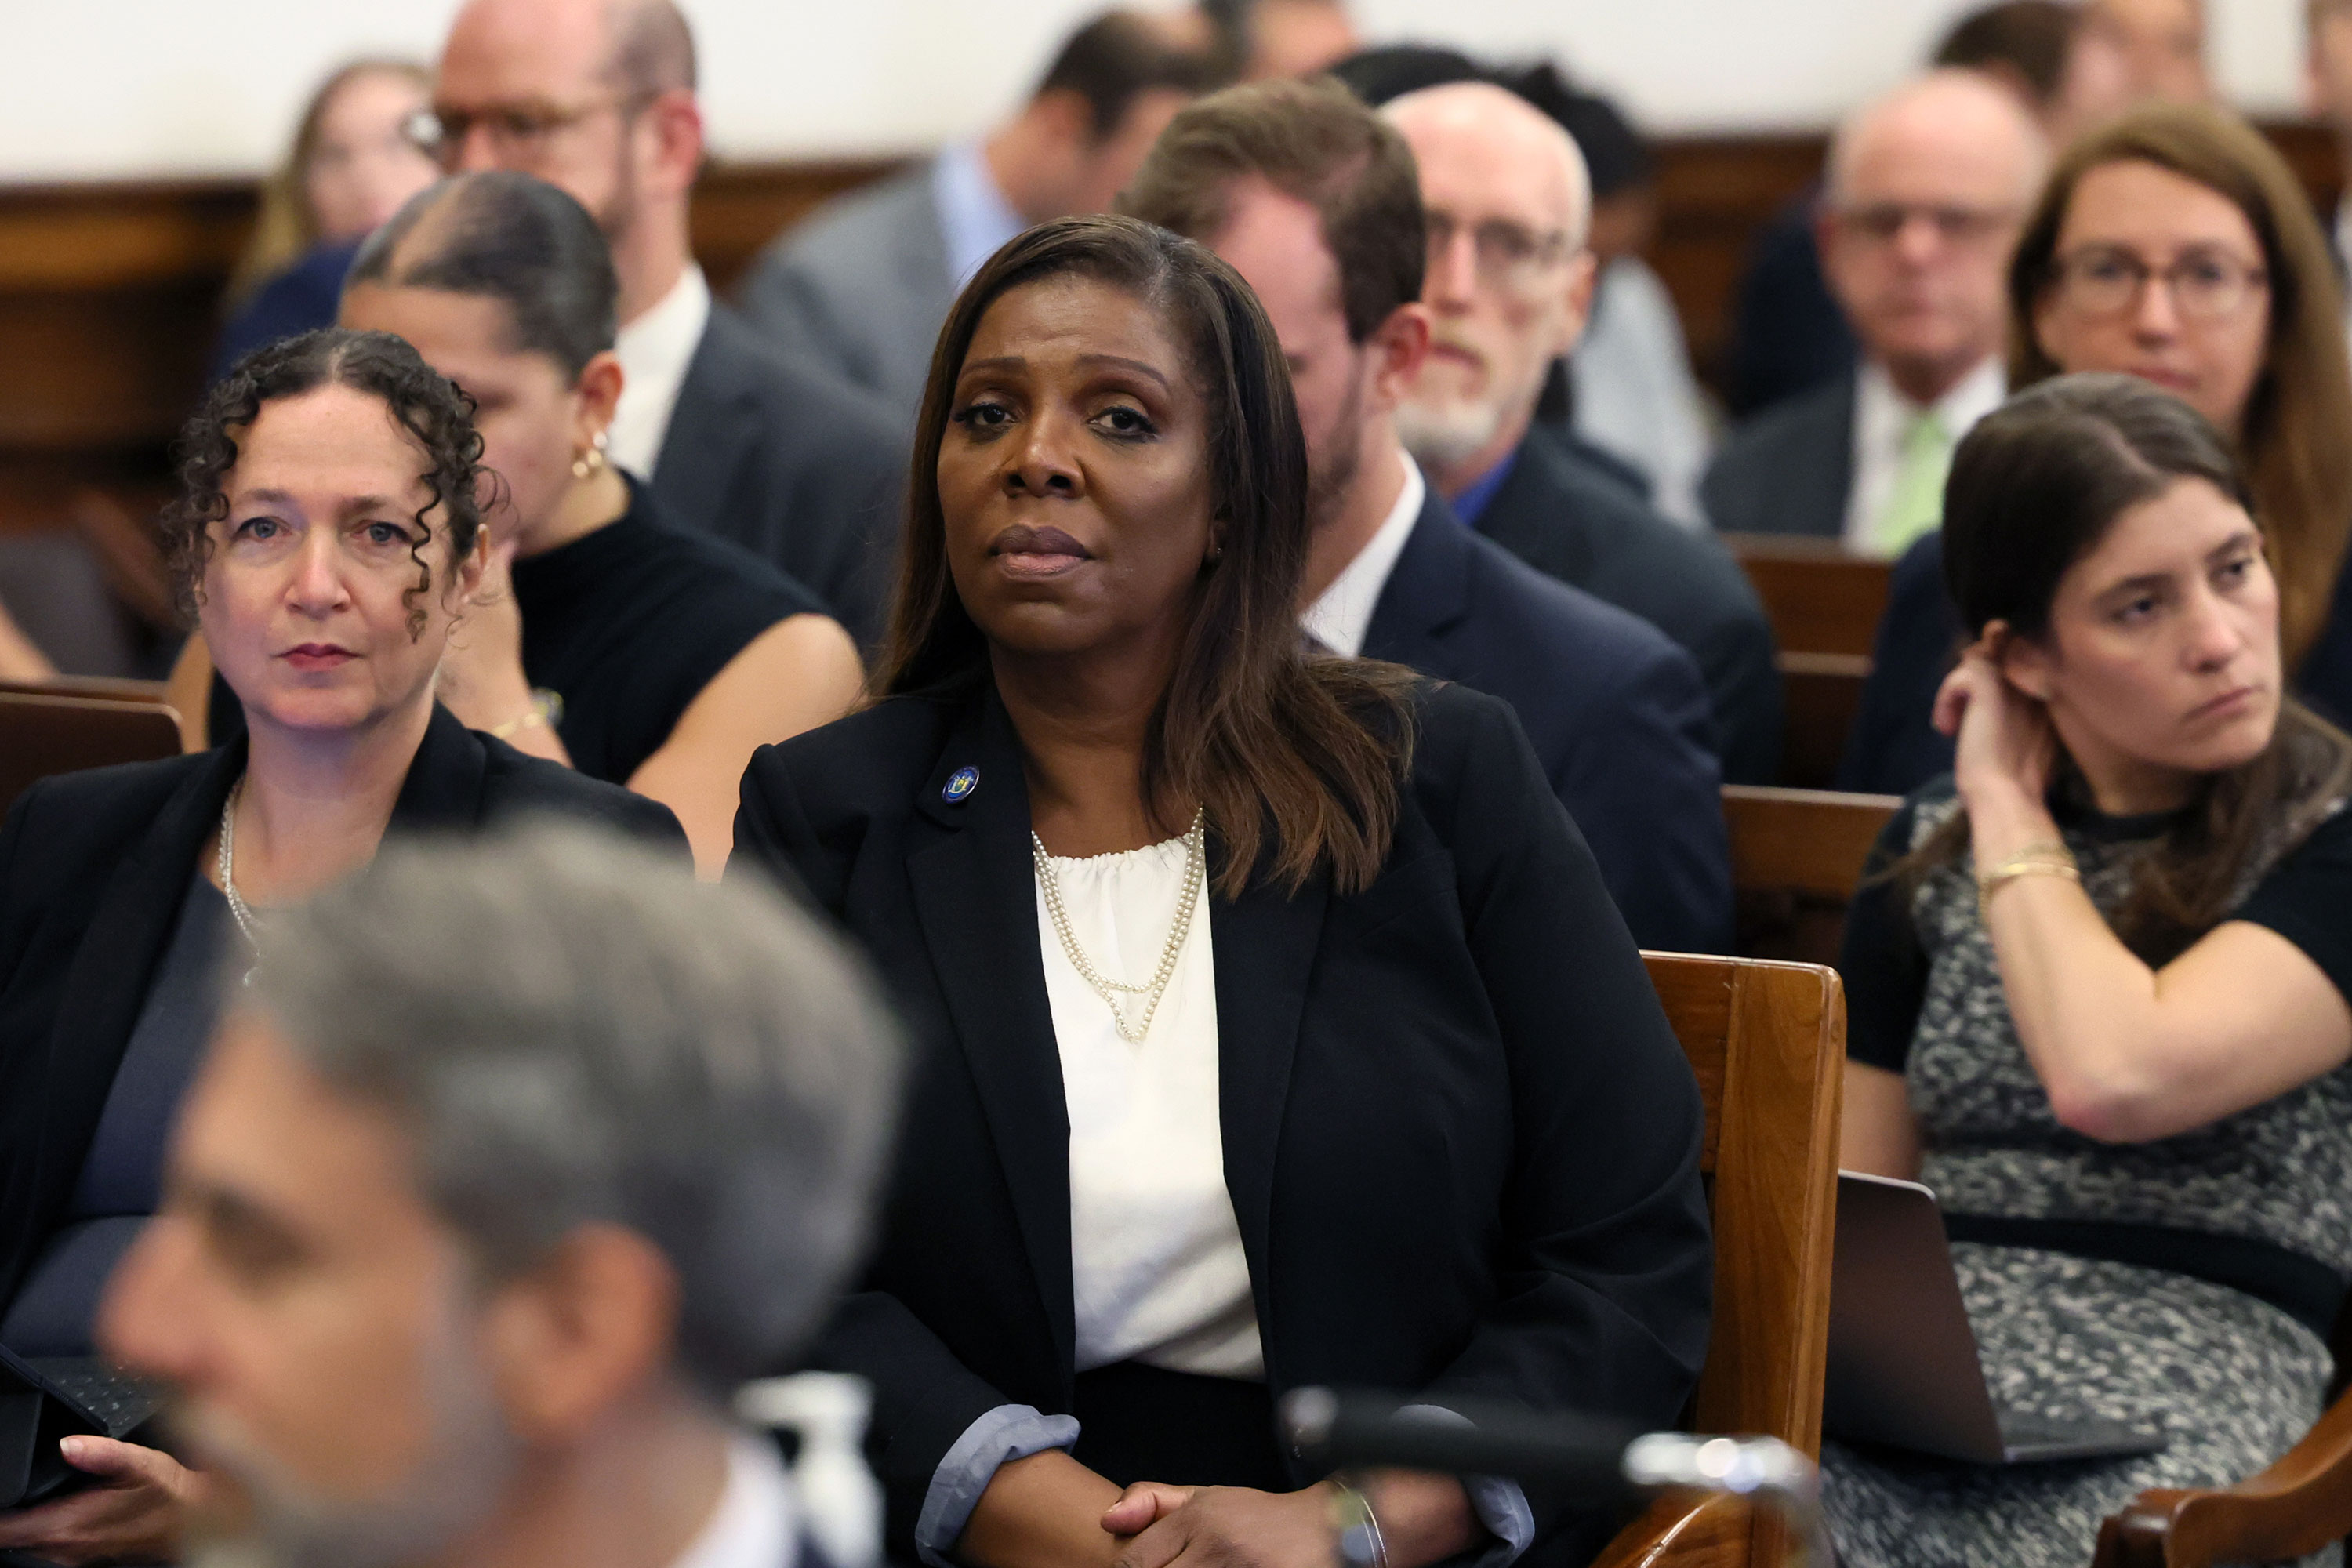 New York Attorney General Letitia James watches from the gallery as former President Donald Trump appears in court in New York in October.